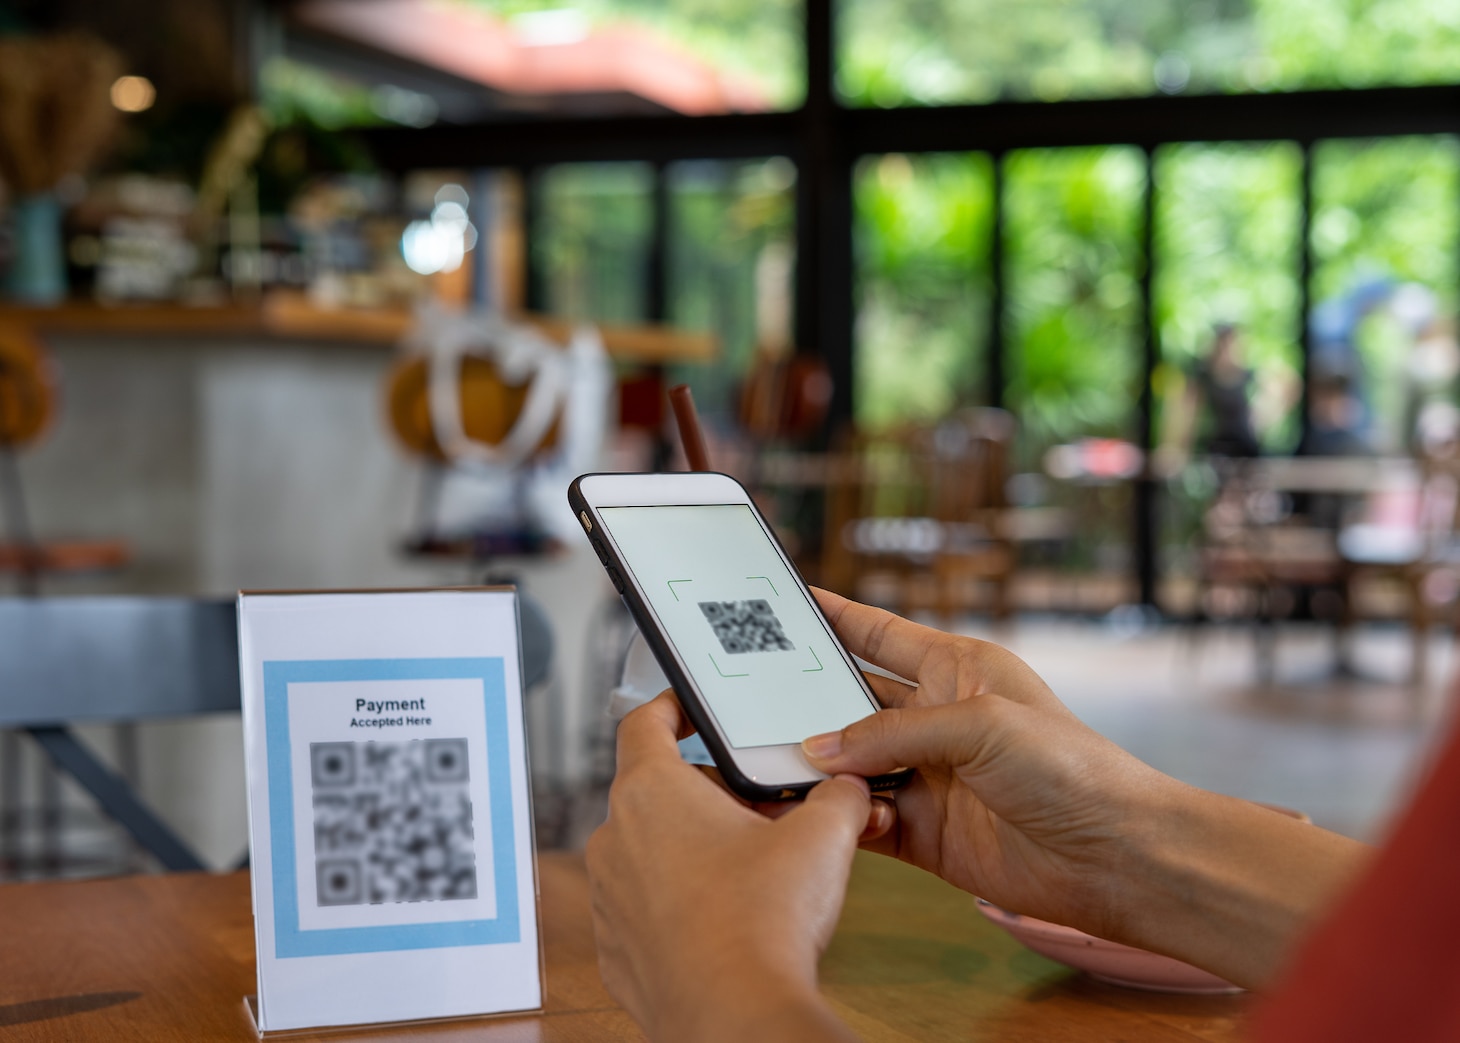 Stock image of a person using a smart-phone to access a web site via QR Code